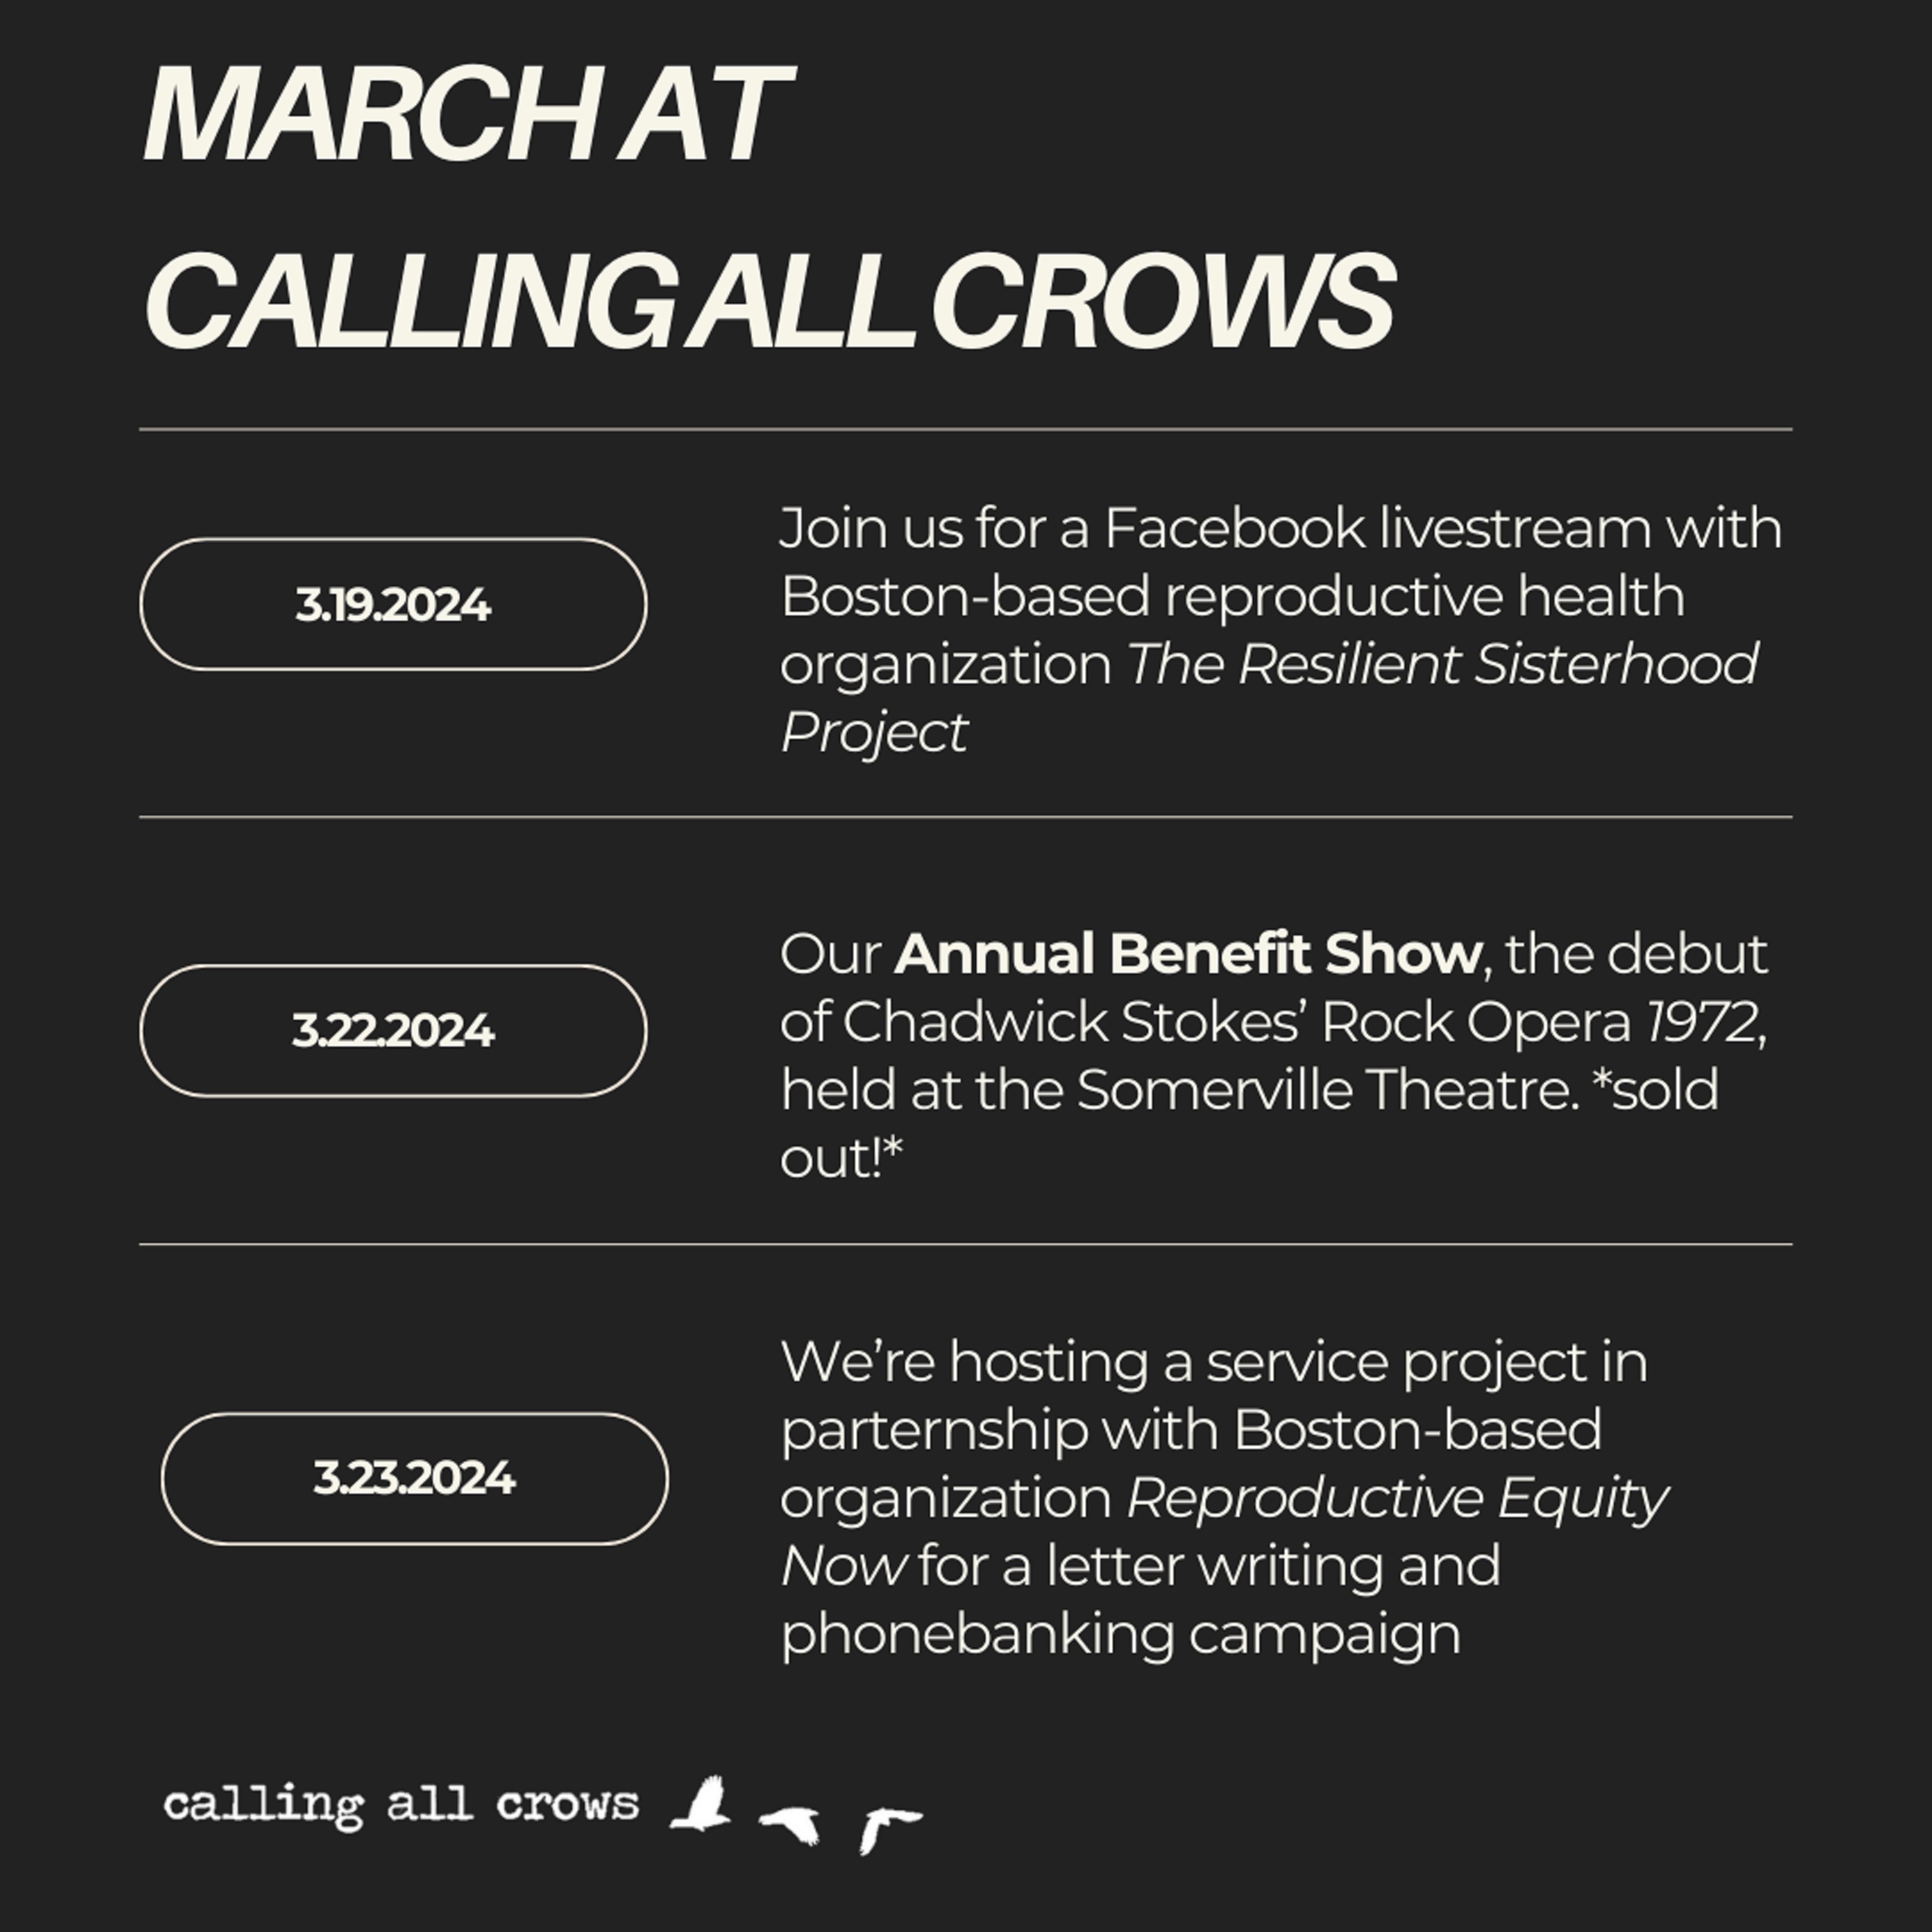 Calling All Crows announces three new initiatives in celebration of Women's History Month